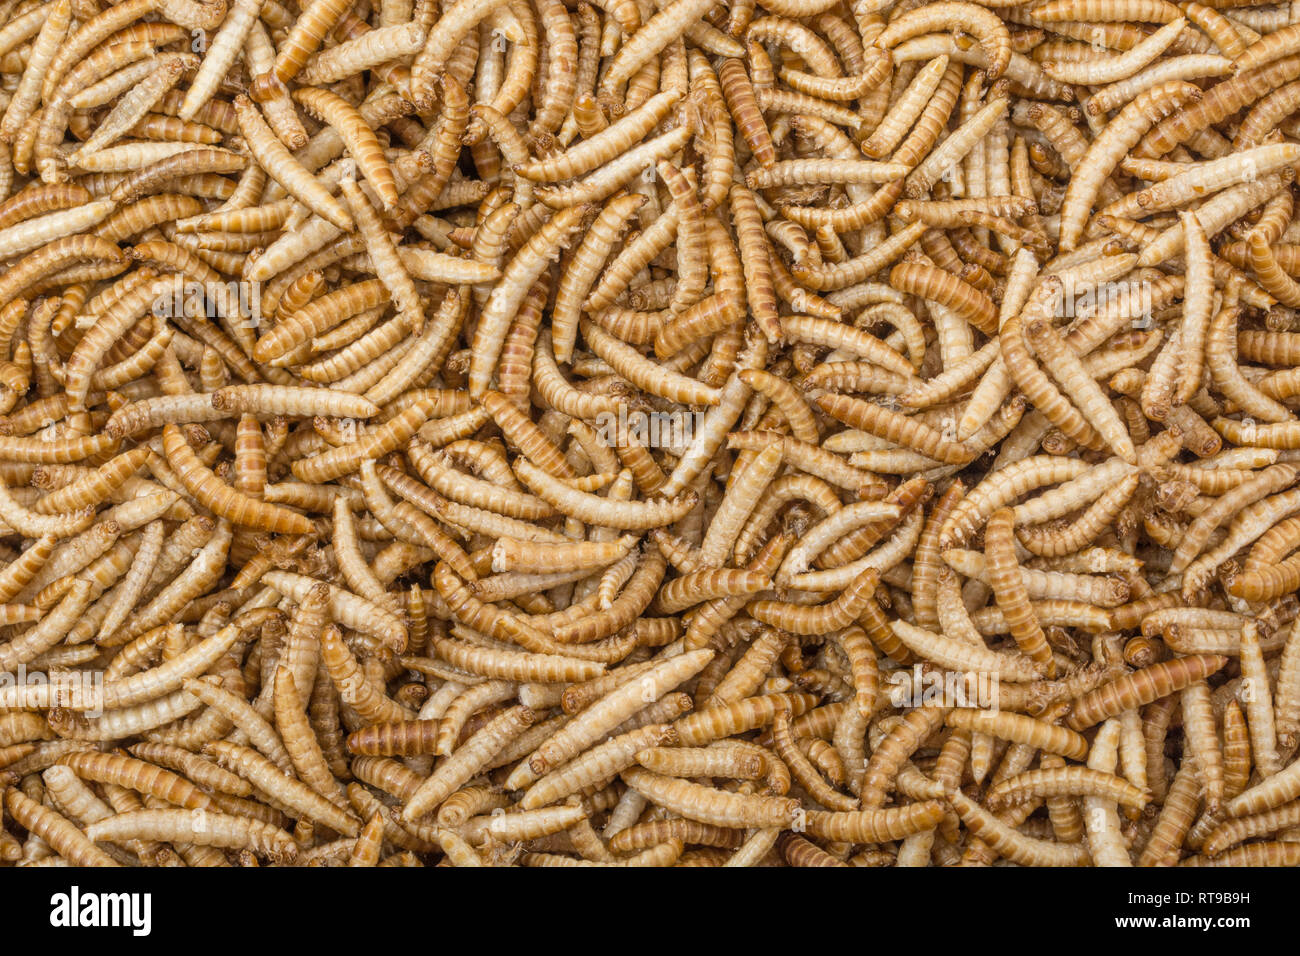 Freeze-dried edible Buffalo worms, Alphitobius diaperinus. Metaphor eating bugs, eating insects, Entomophagy, edible bugs bizarre foods edible insects Stock Photo